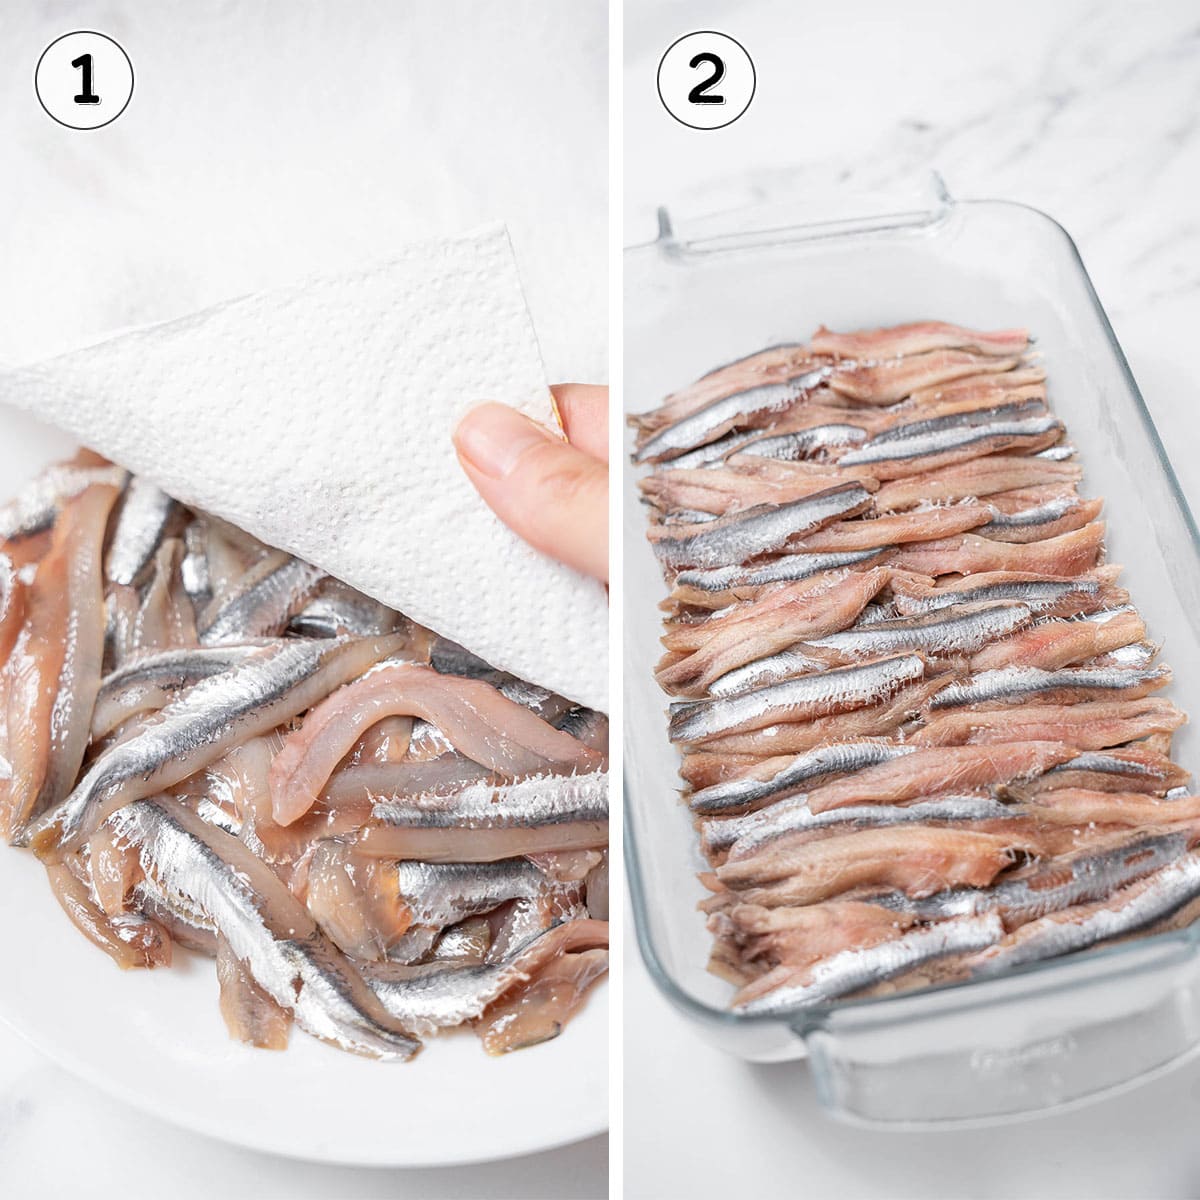 patting dry the anchovies and freezing in a dish.